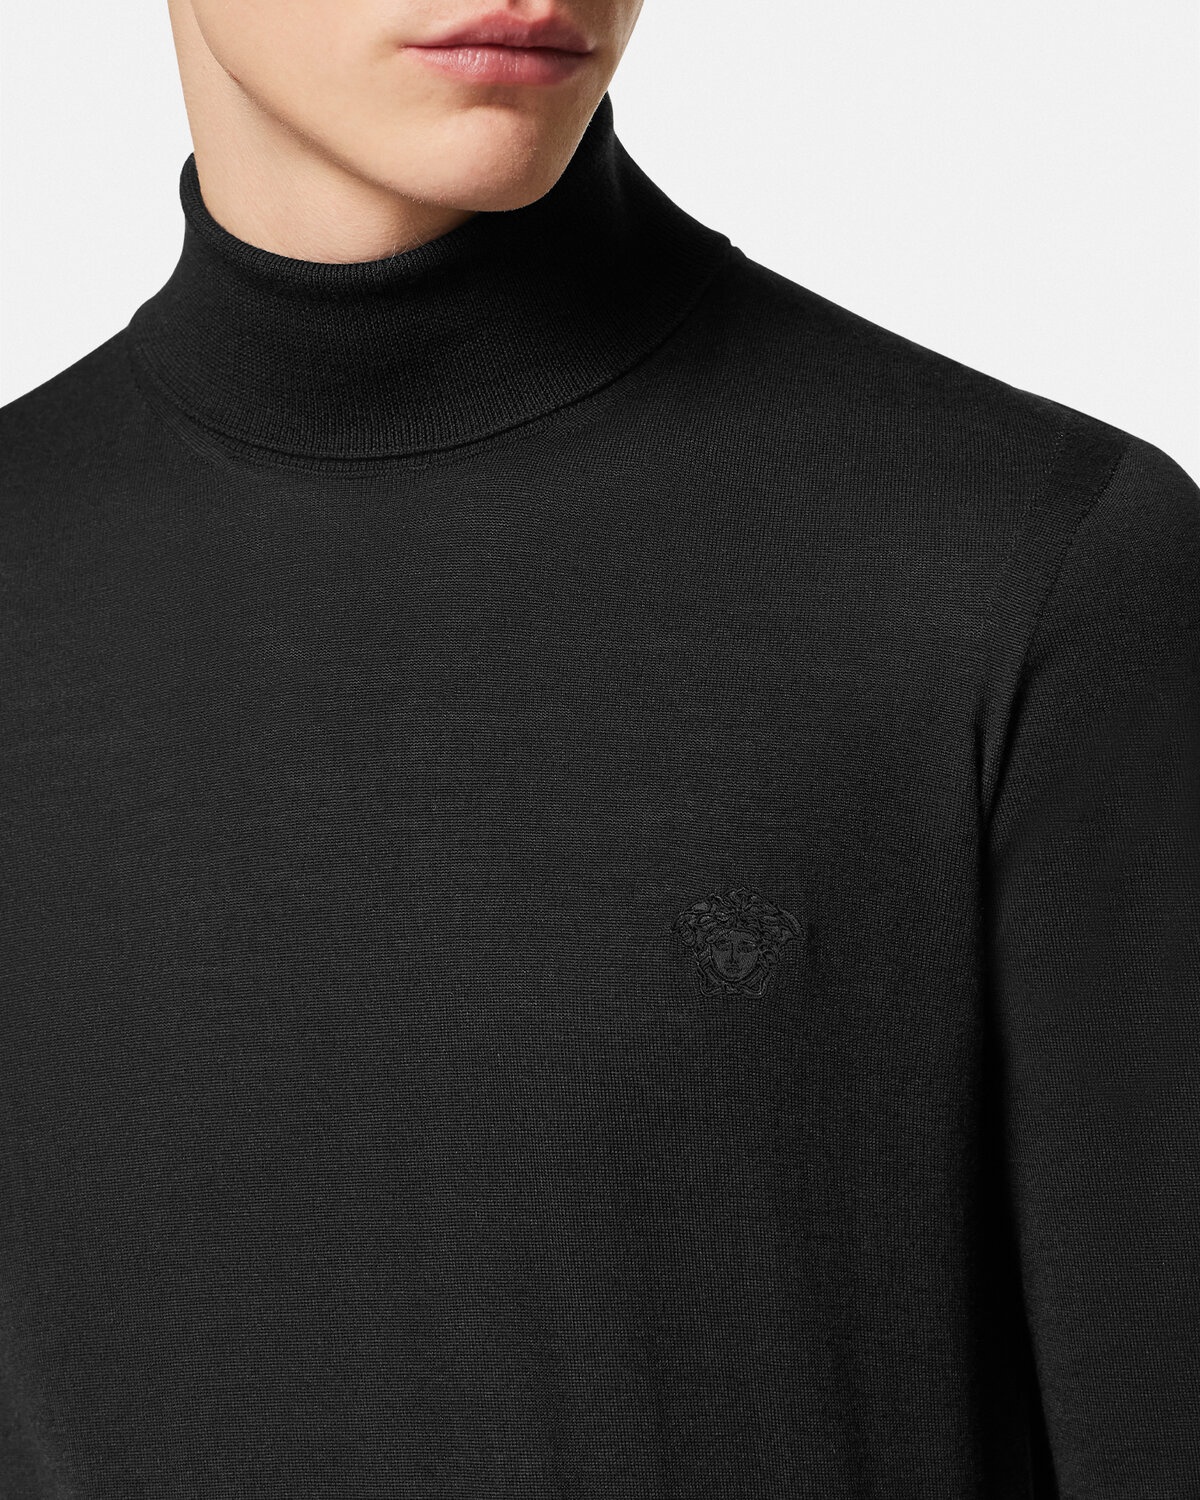 Embroidered Turtleneck Sweater - 5